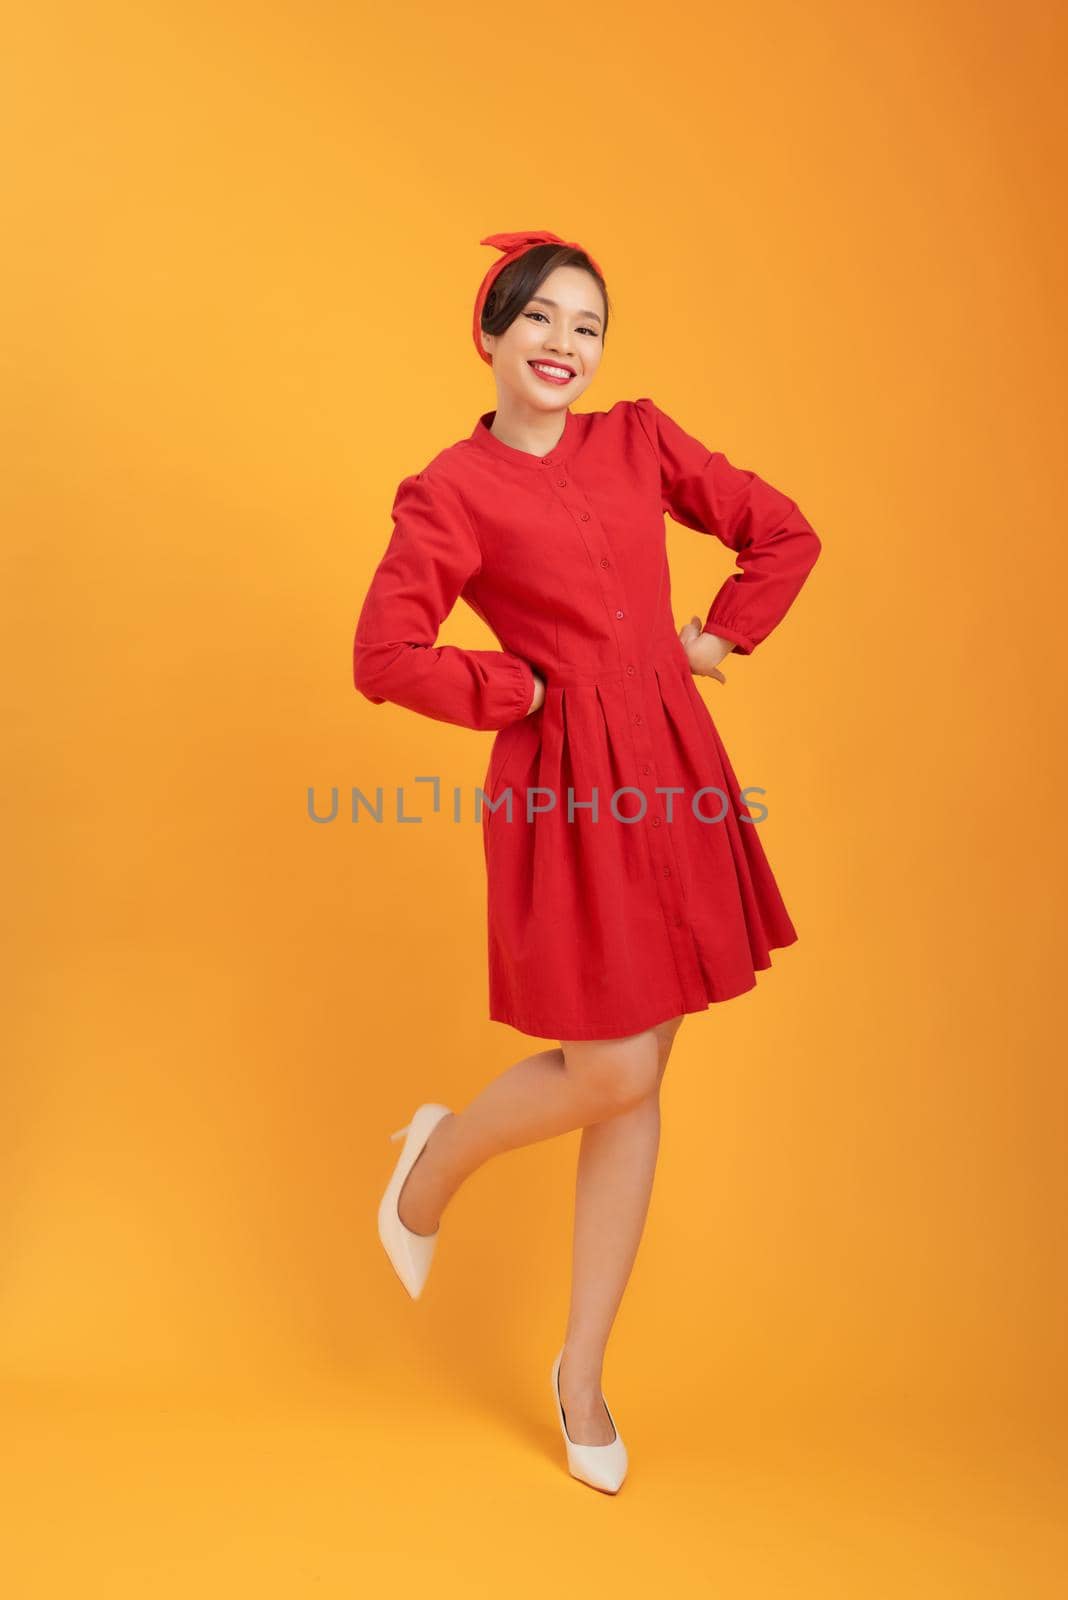 Young gorgoeus Asian woman in red dress standing over orange background.